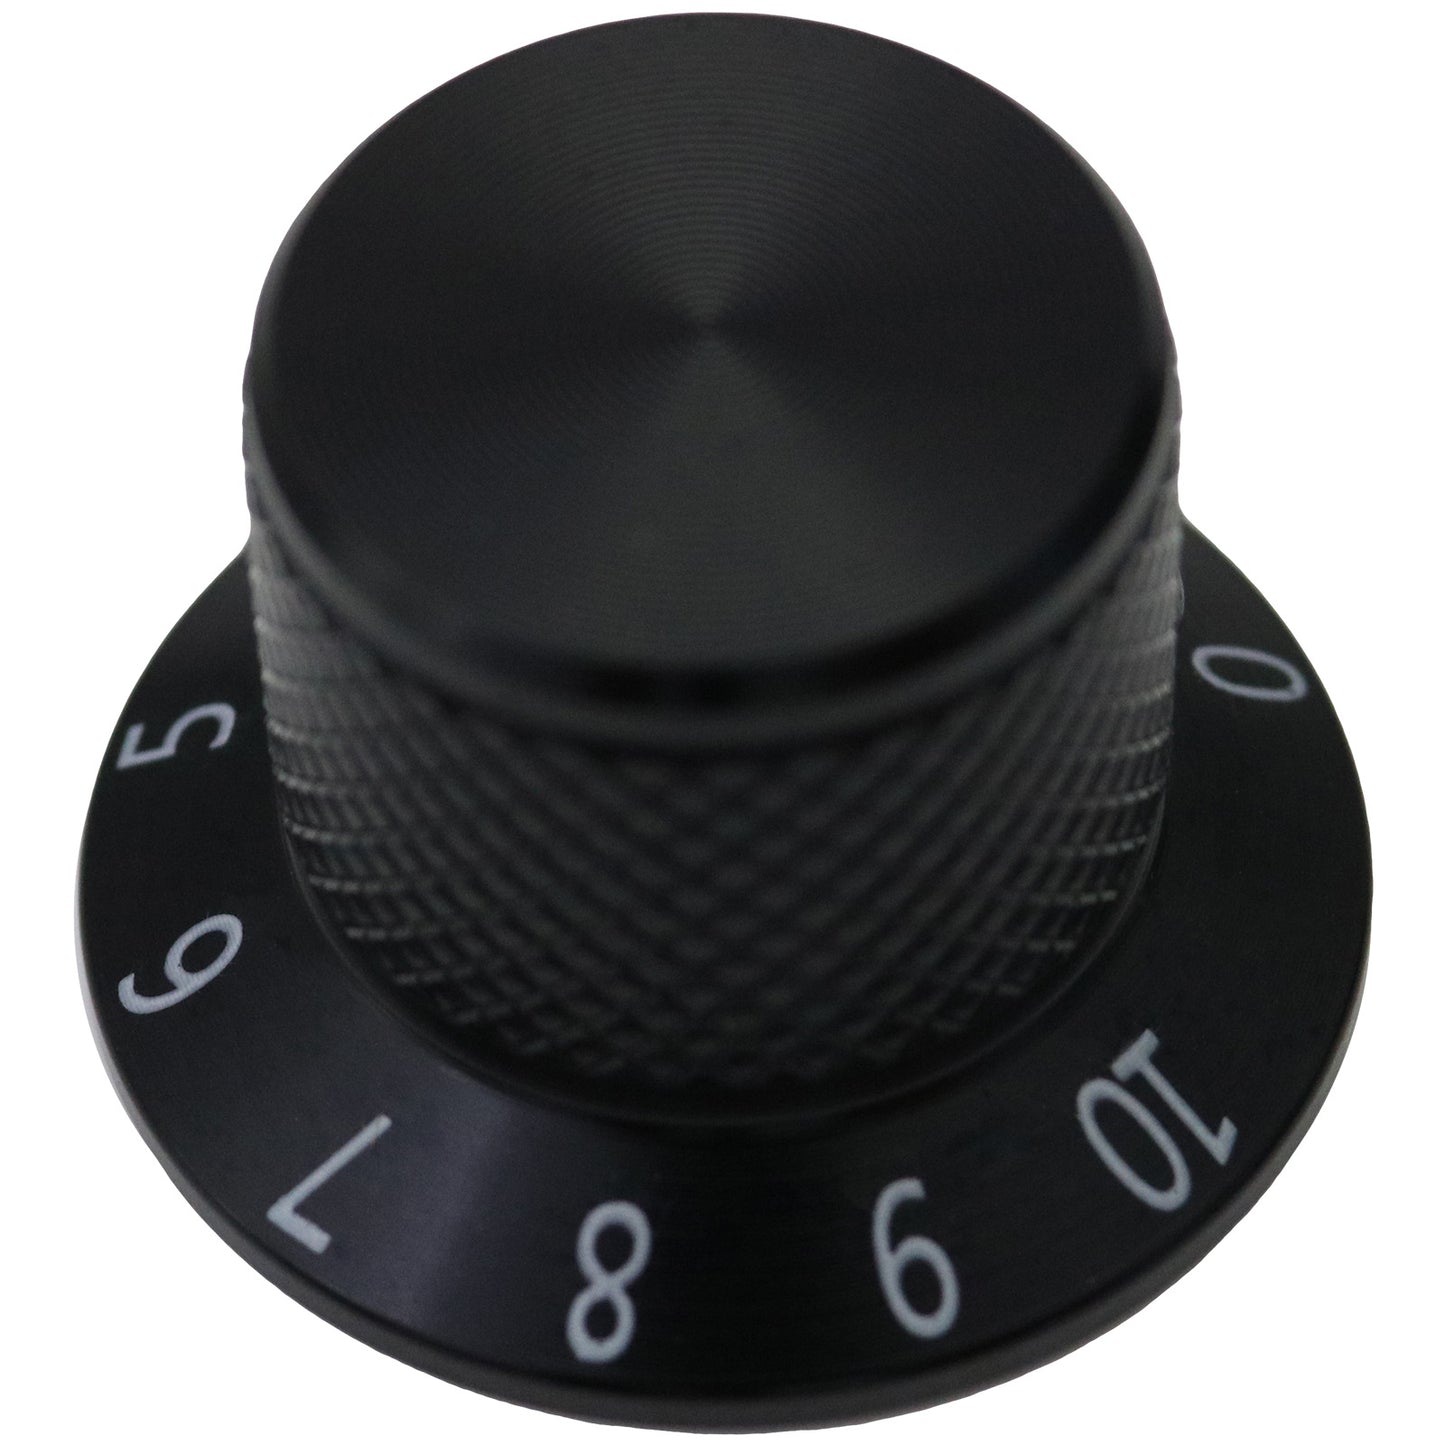 Skirted Solid Aluminium Control Knob With Number Scale 0-10